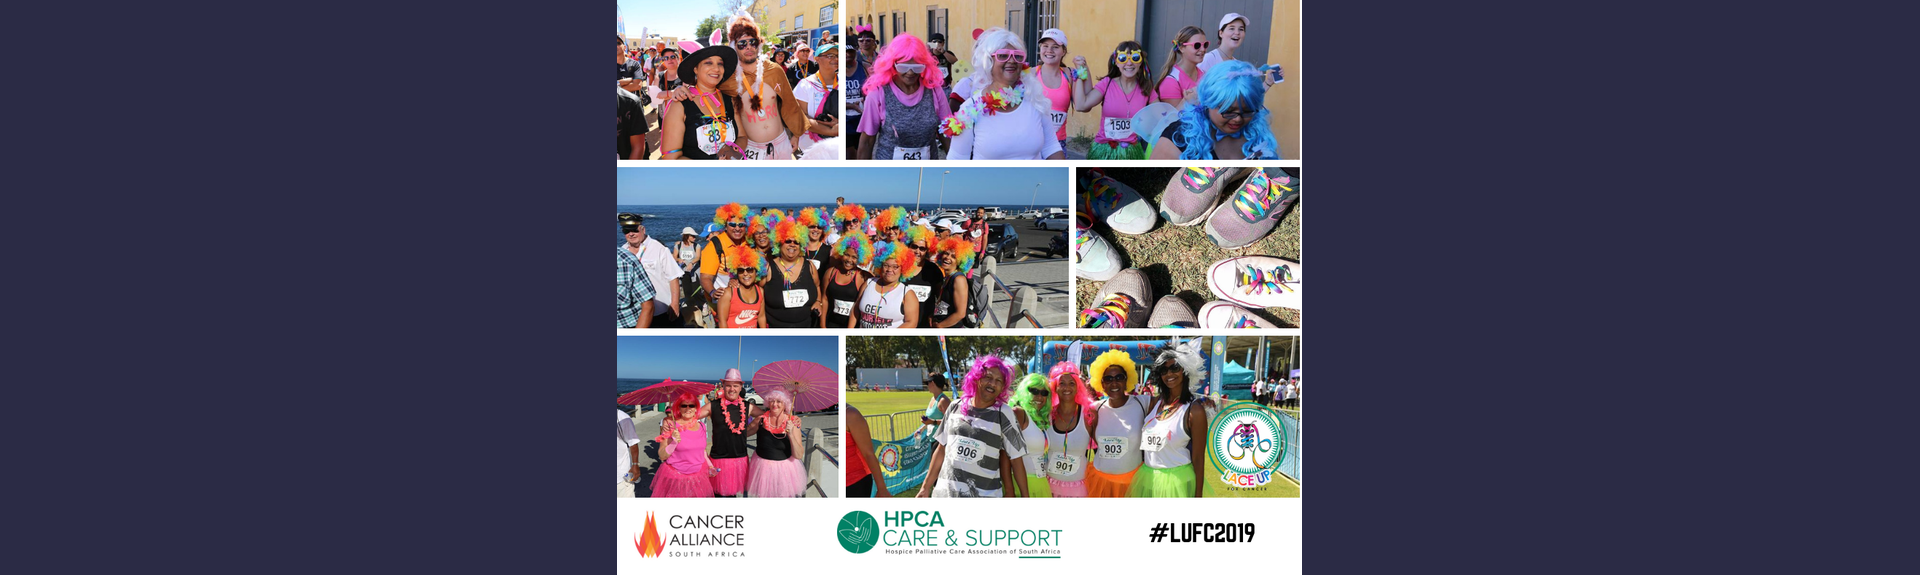 Lace up for cancer 2019 